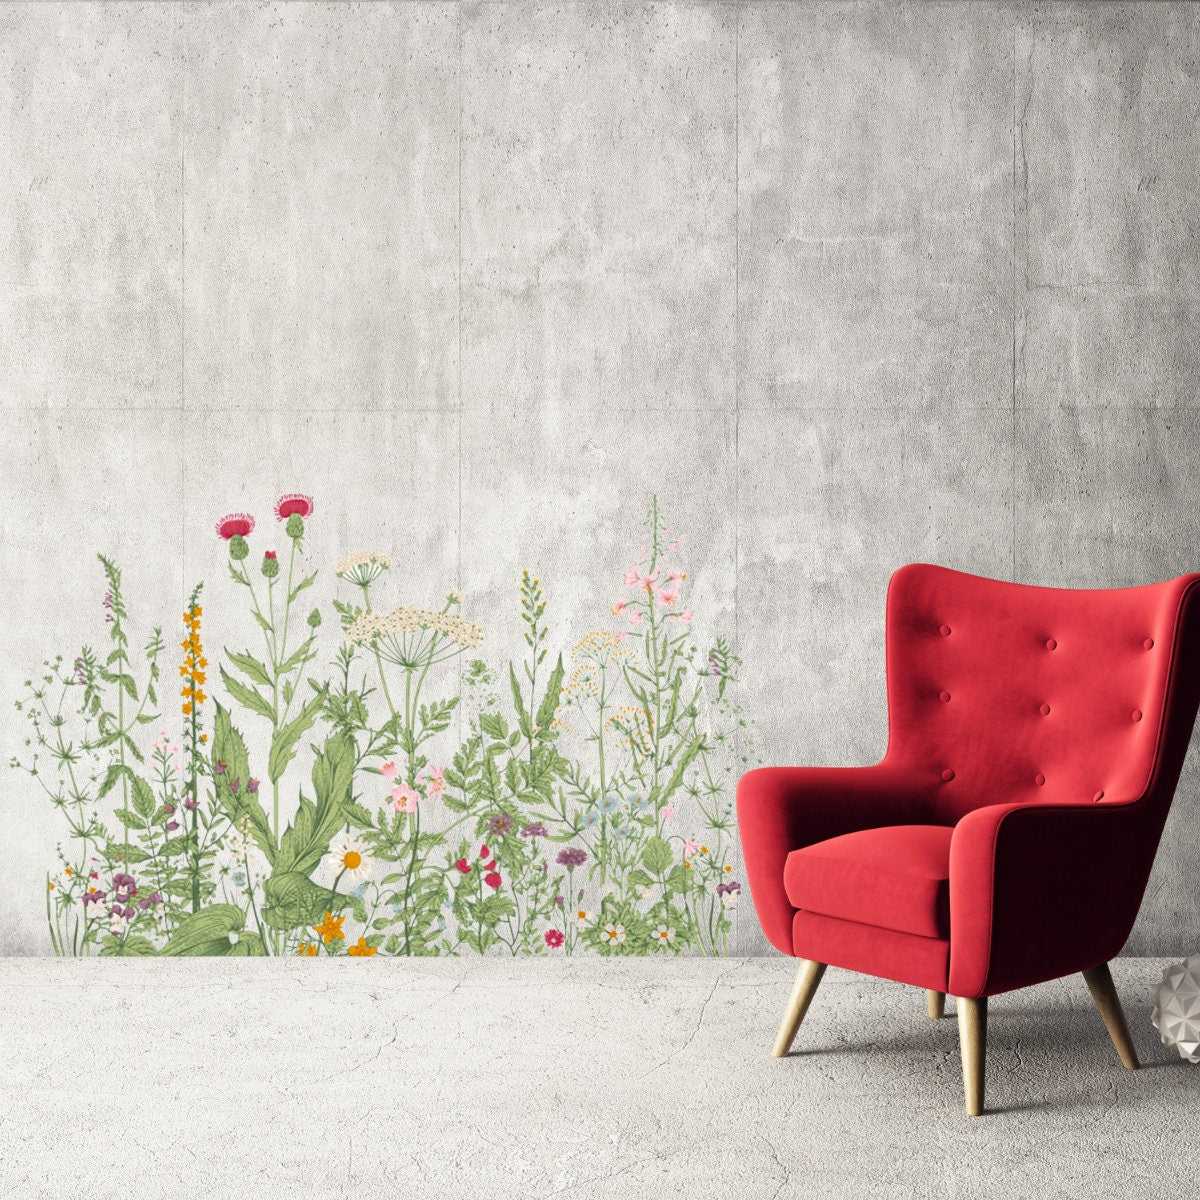 Flower Plant Wall Sticker | Herbal Wildflower Wall Sticker | Natural Scenery Living Room PVC